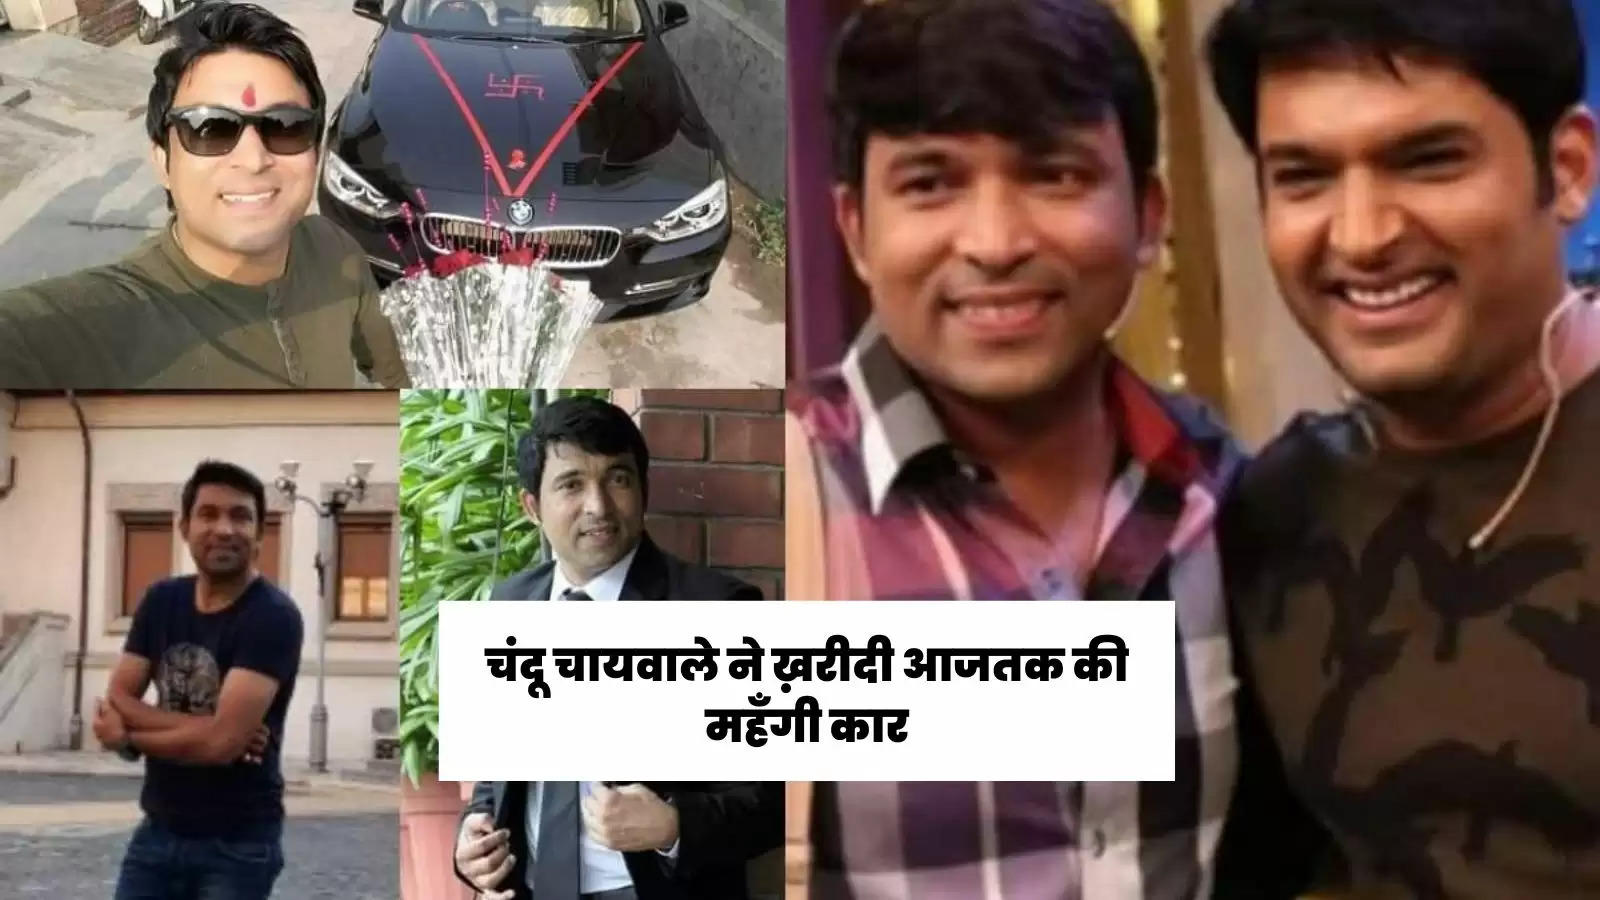 chandu-chaiwala-of-the-kapil-sharma-show-bought-such-an-expensive-car-knowing